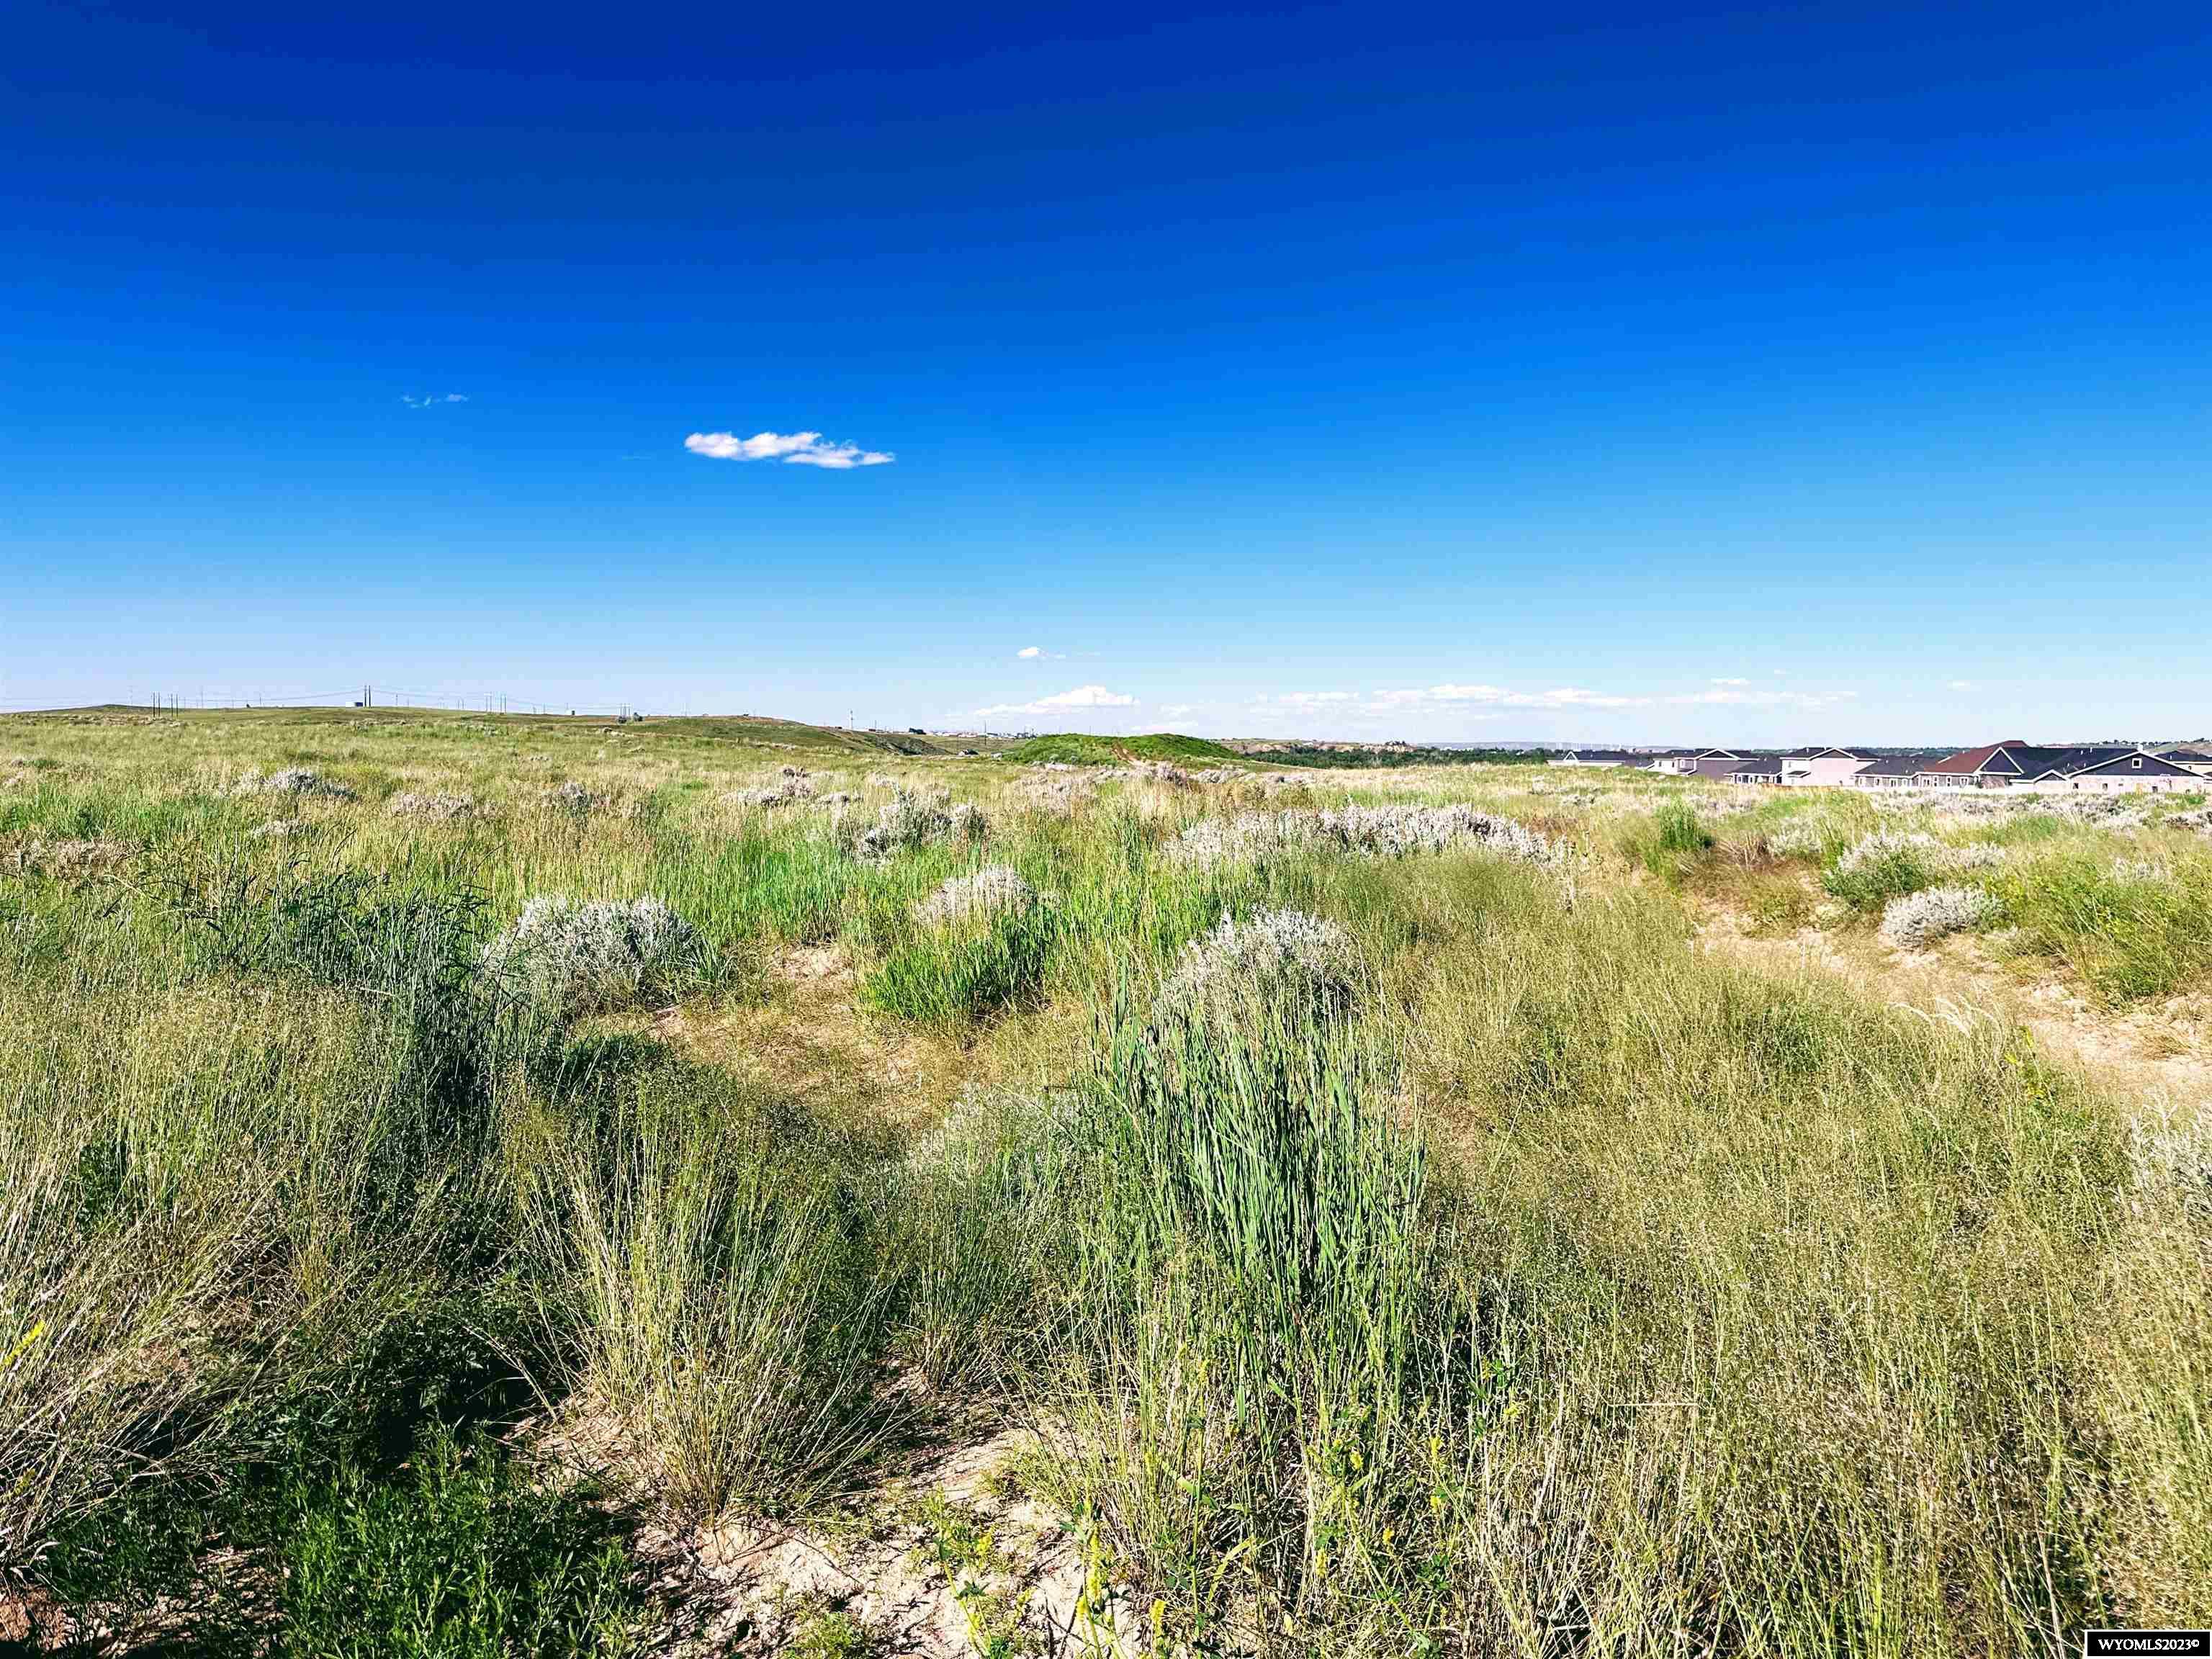 Don't miss out on this excellent opportunity! Approximately 80 acres of residential development land located within Casper city limits and adjacent to an established neighborhood!